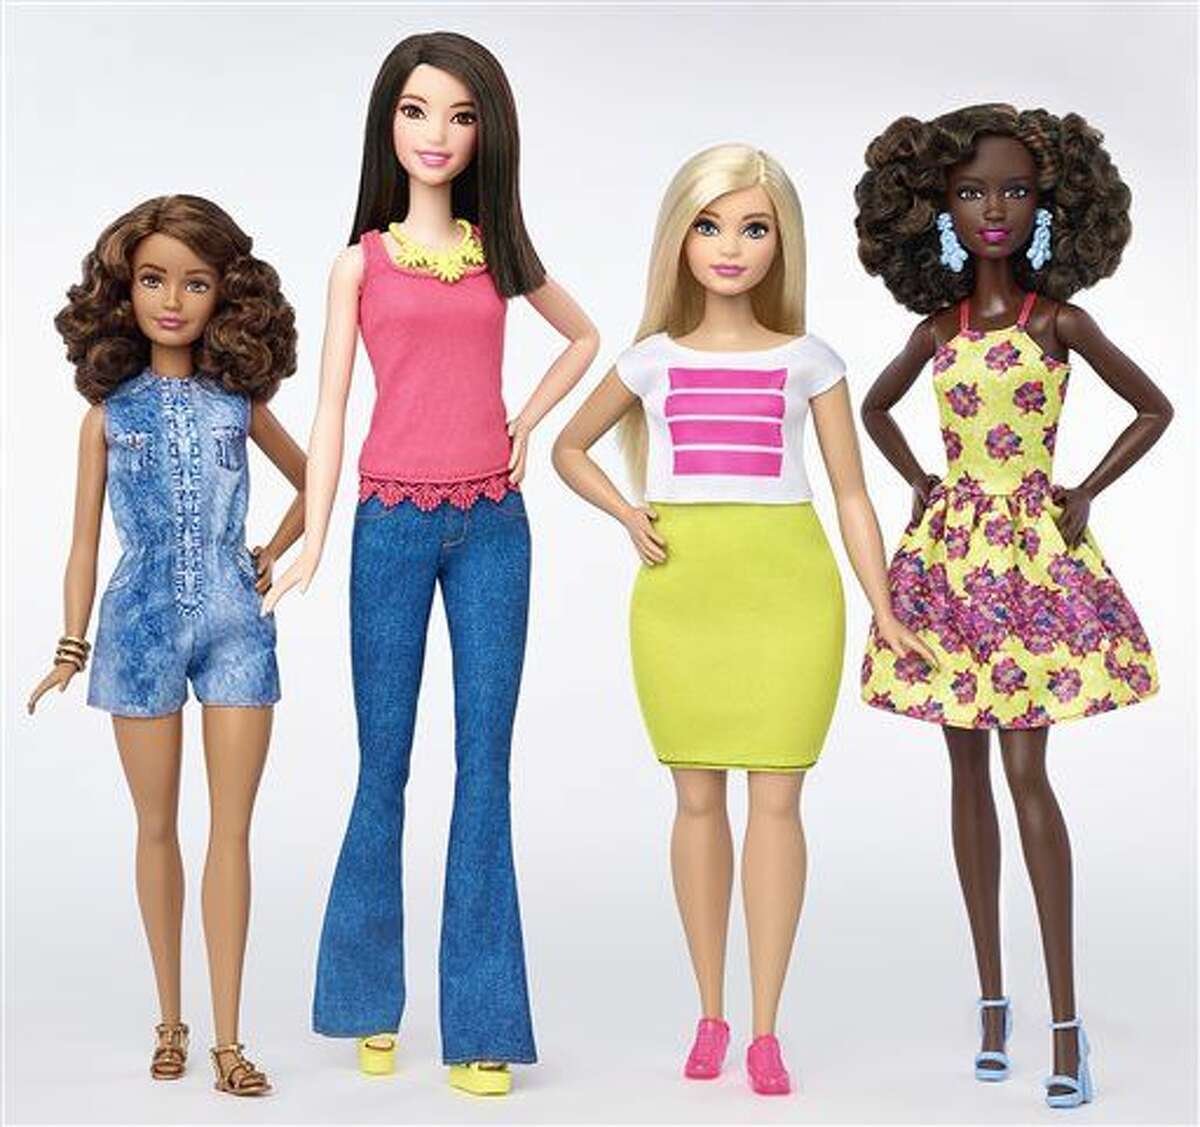 This photo provided by Mattel shows a group of new Barbie dolls introduced in January 2016. Mattel, the maker of the famous plastic doll, said it will start selling Barbie’s in three new body types: tall, curvy and petite. She’ll also come in seven skin tones, 22 eye colors and 24 hairstyles. (Mattel via AP)